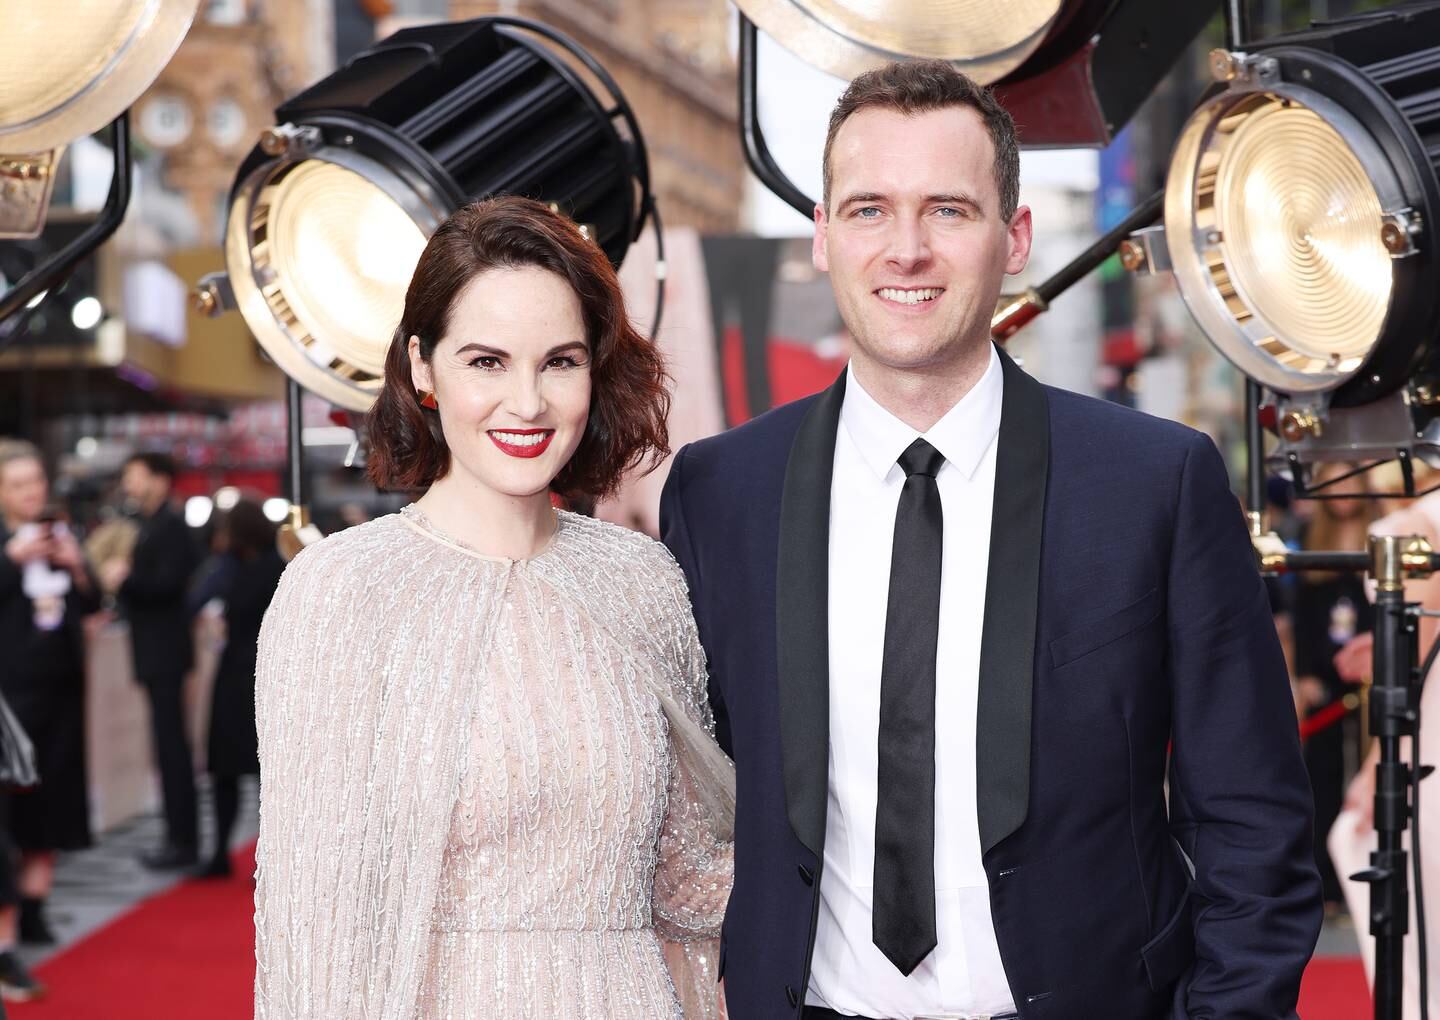 Michelle Dockery and Jasper Waller-Bridge have been dating since 2019. Getty Images